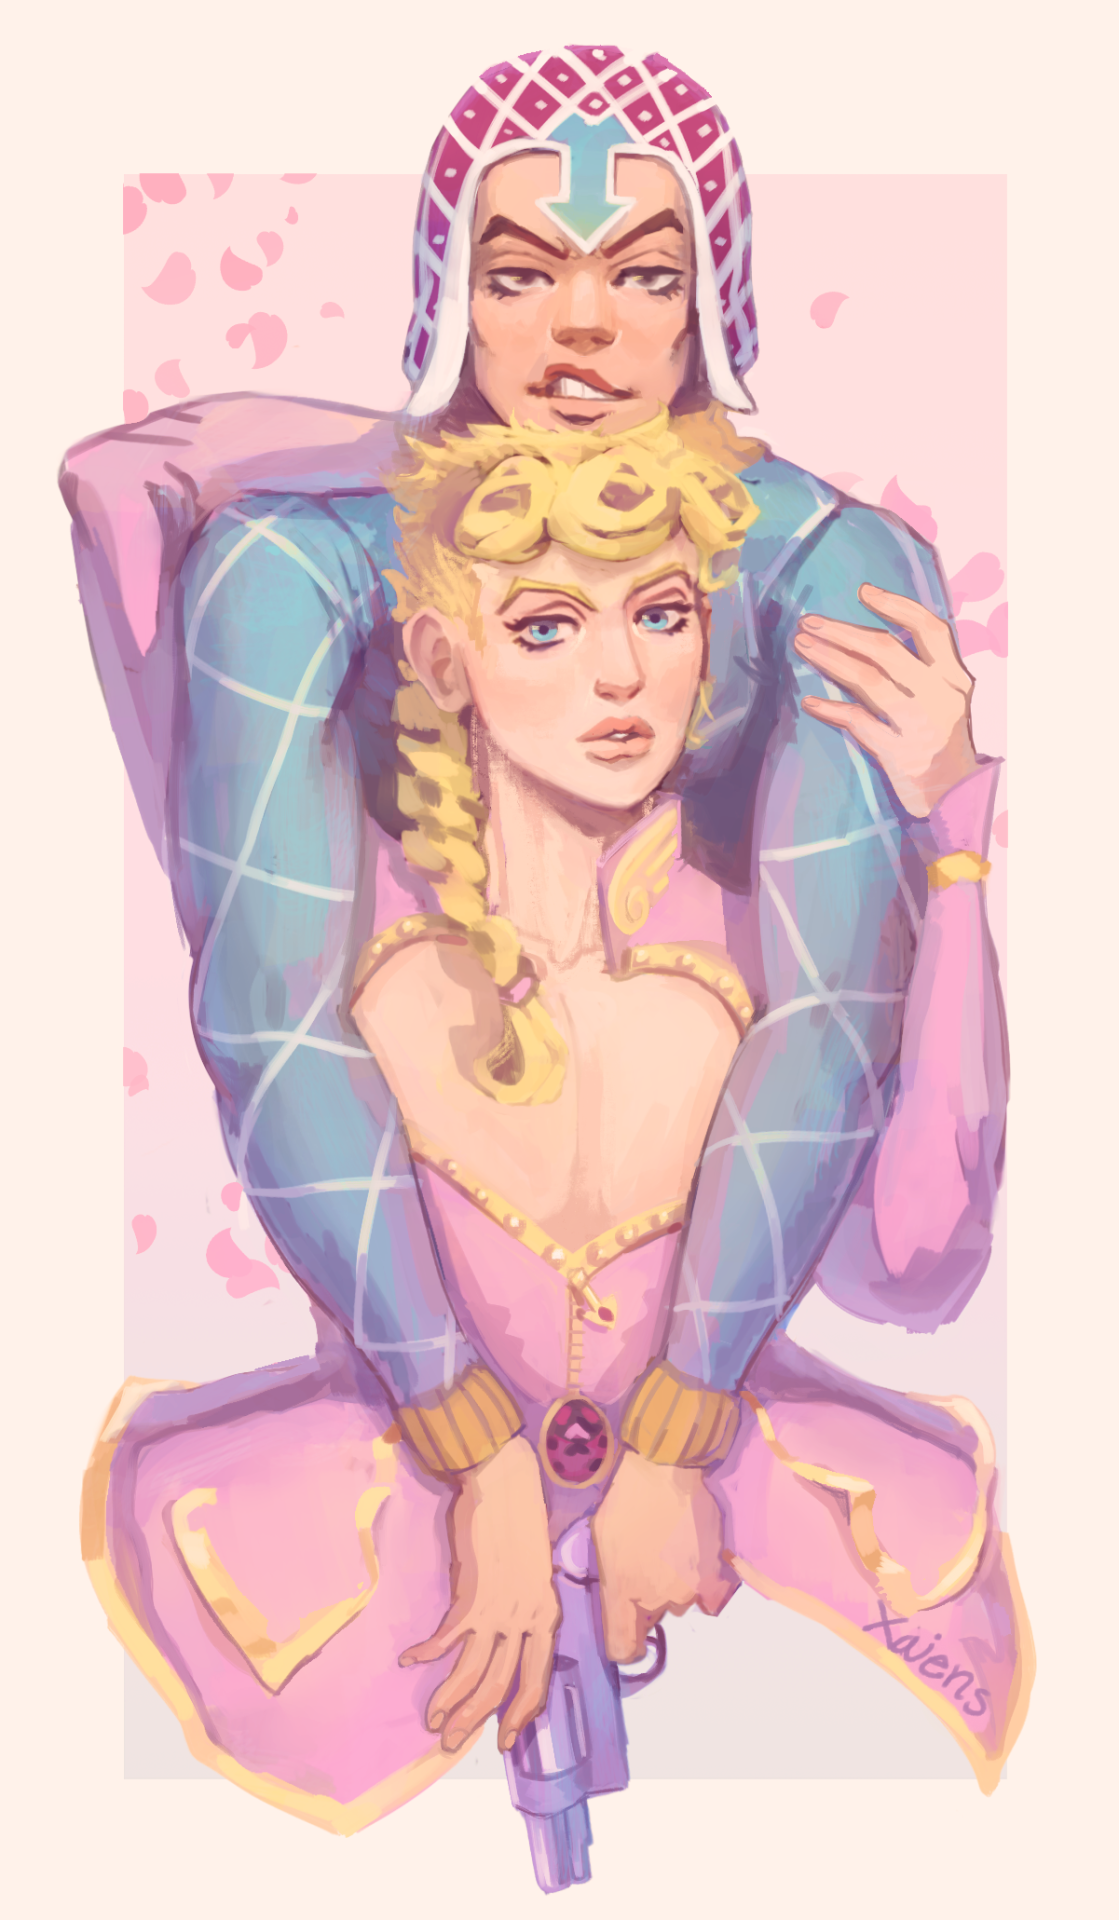 ☮ 💜 — I just started reading vento aureo and got